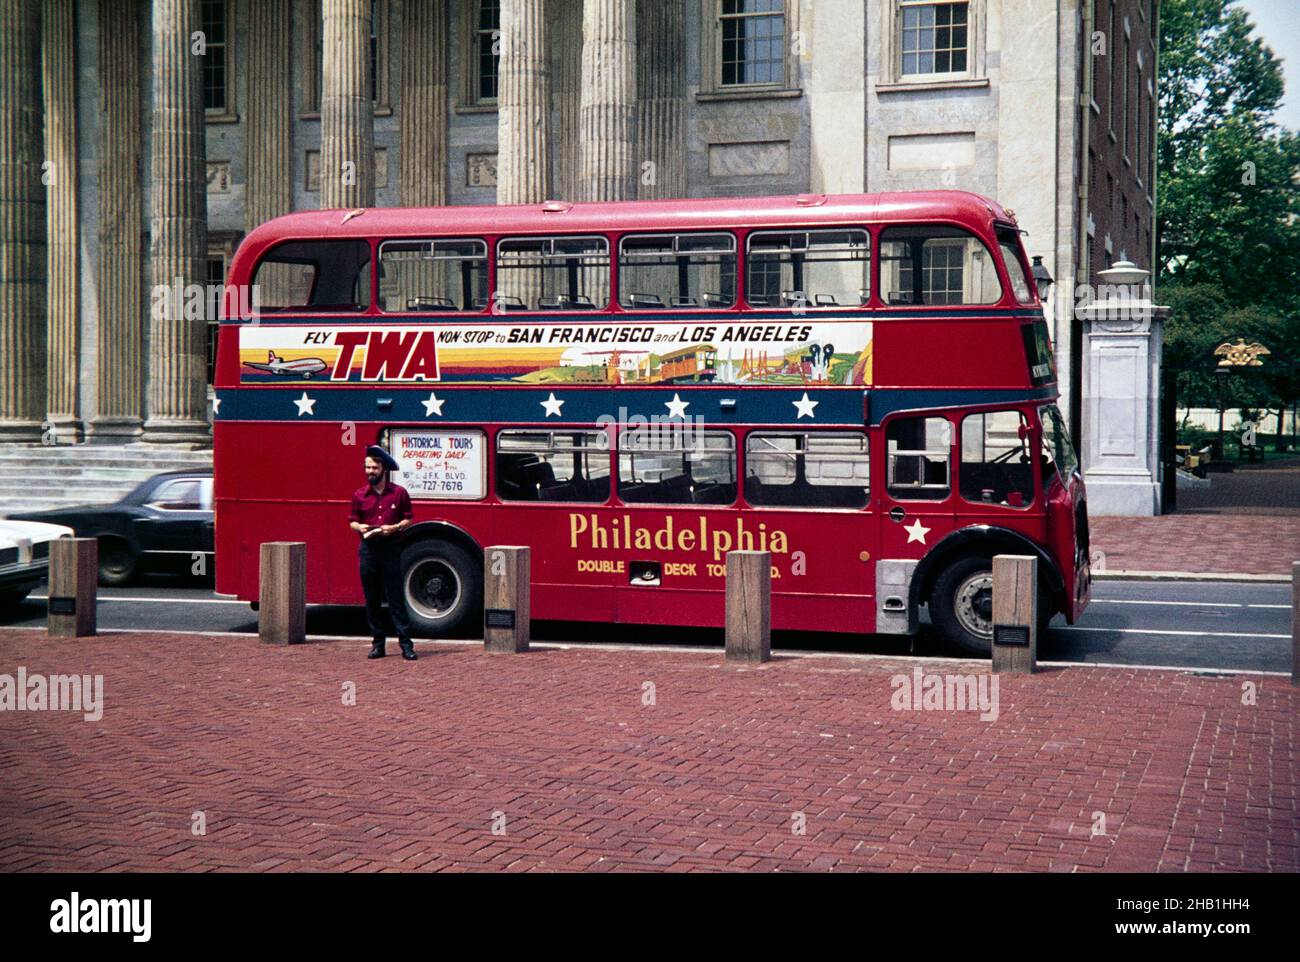 Red London double decker bus used for city sightseeing tours, Philadelphia, Pennsylvania, USA in 1976 Stock Photo